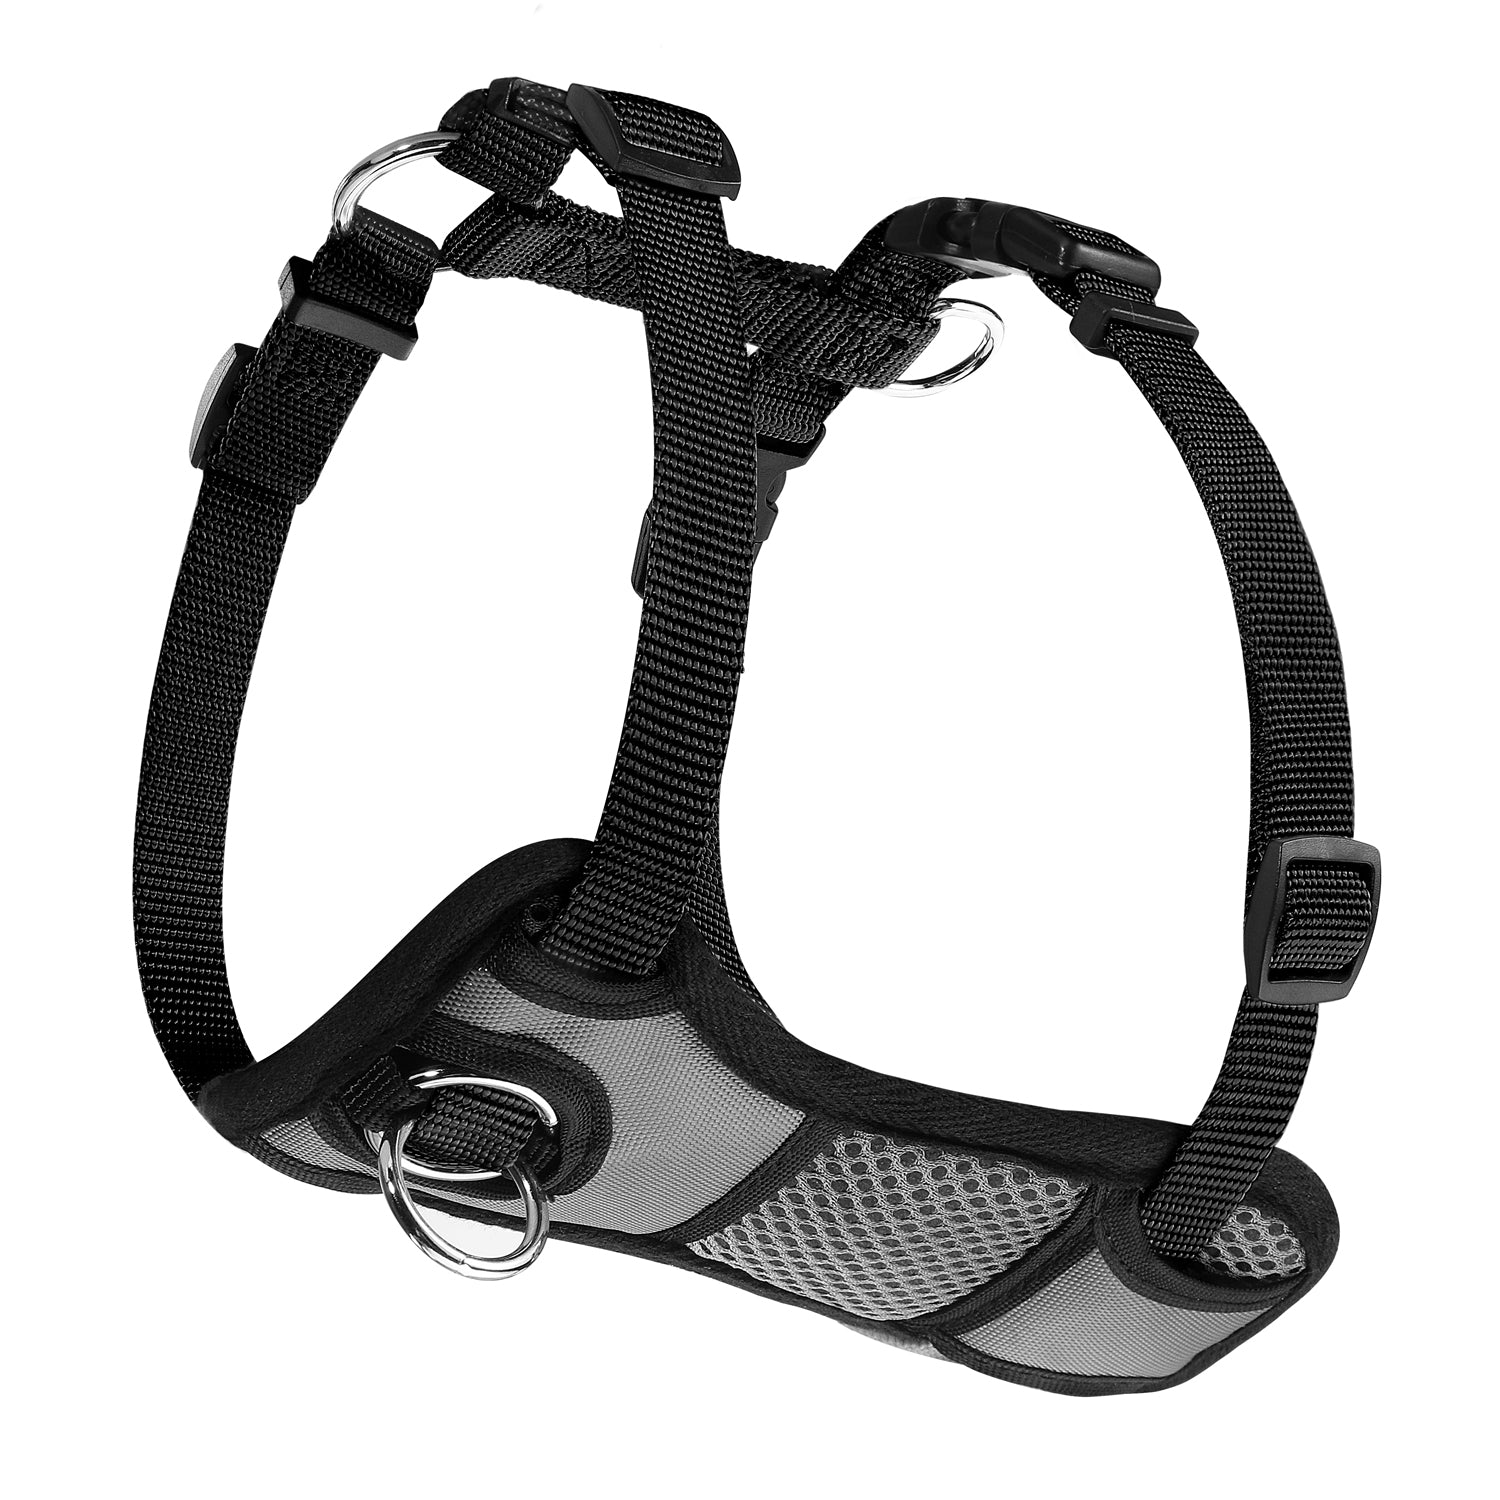 JESPET Dog Harness No Pull with Adjustable Straps for Training, Black